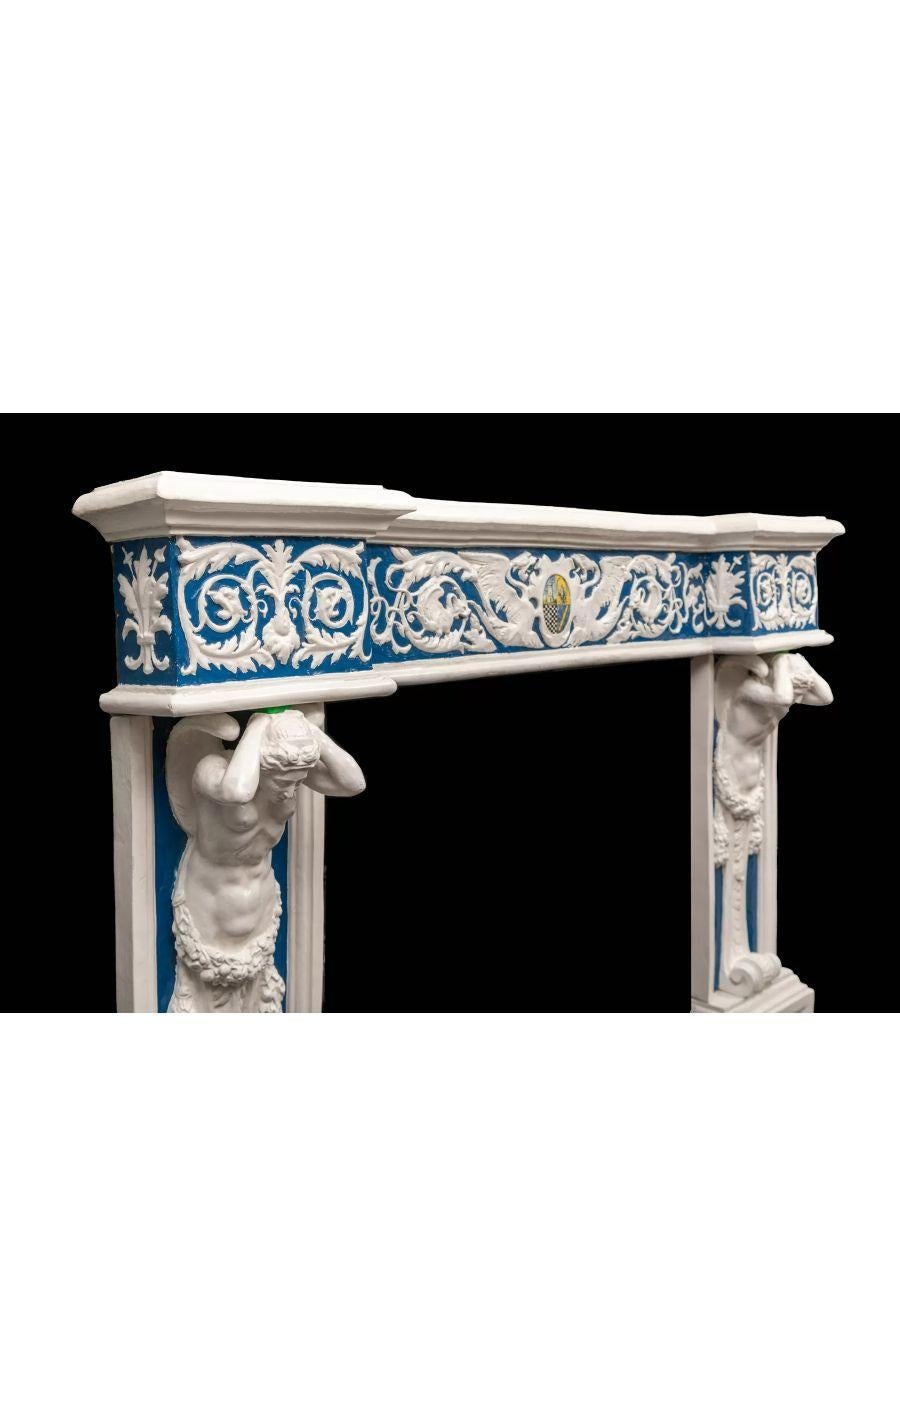 19th Century Glazed Blue & White Pottery by Ulisse Cantagalli, circa 1885

An exceptional antique glazed blue and white pottery fireplace by Ulisse Cantagalli, Italian designer of lustre ware and pottery.

The jambs with female caryatids supporting